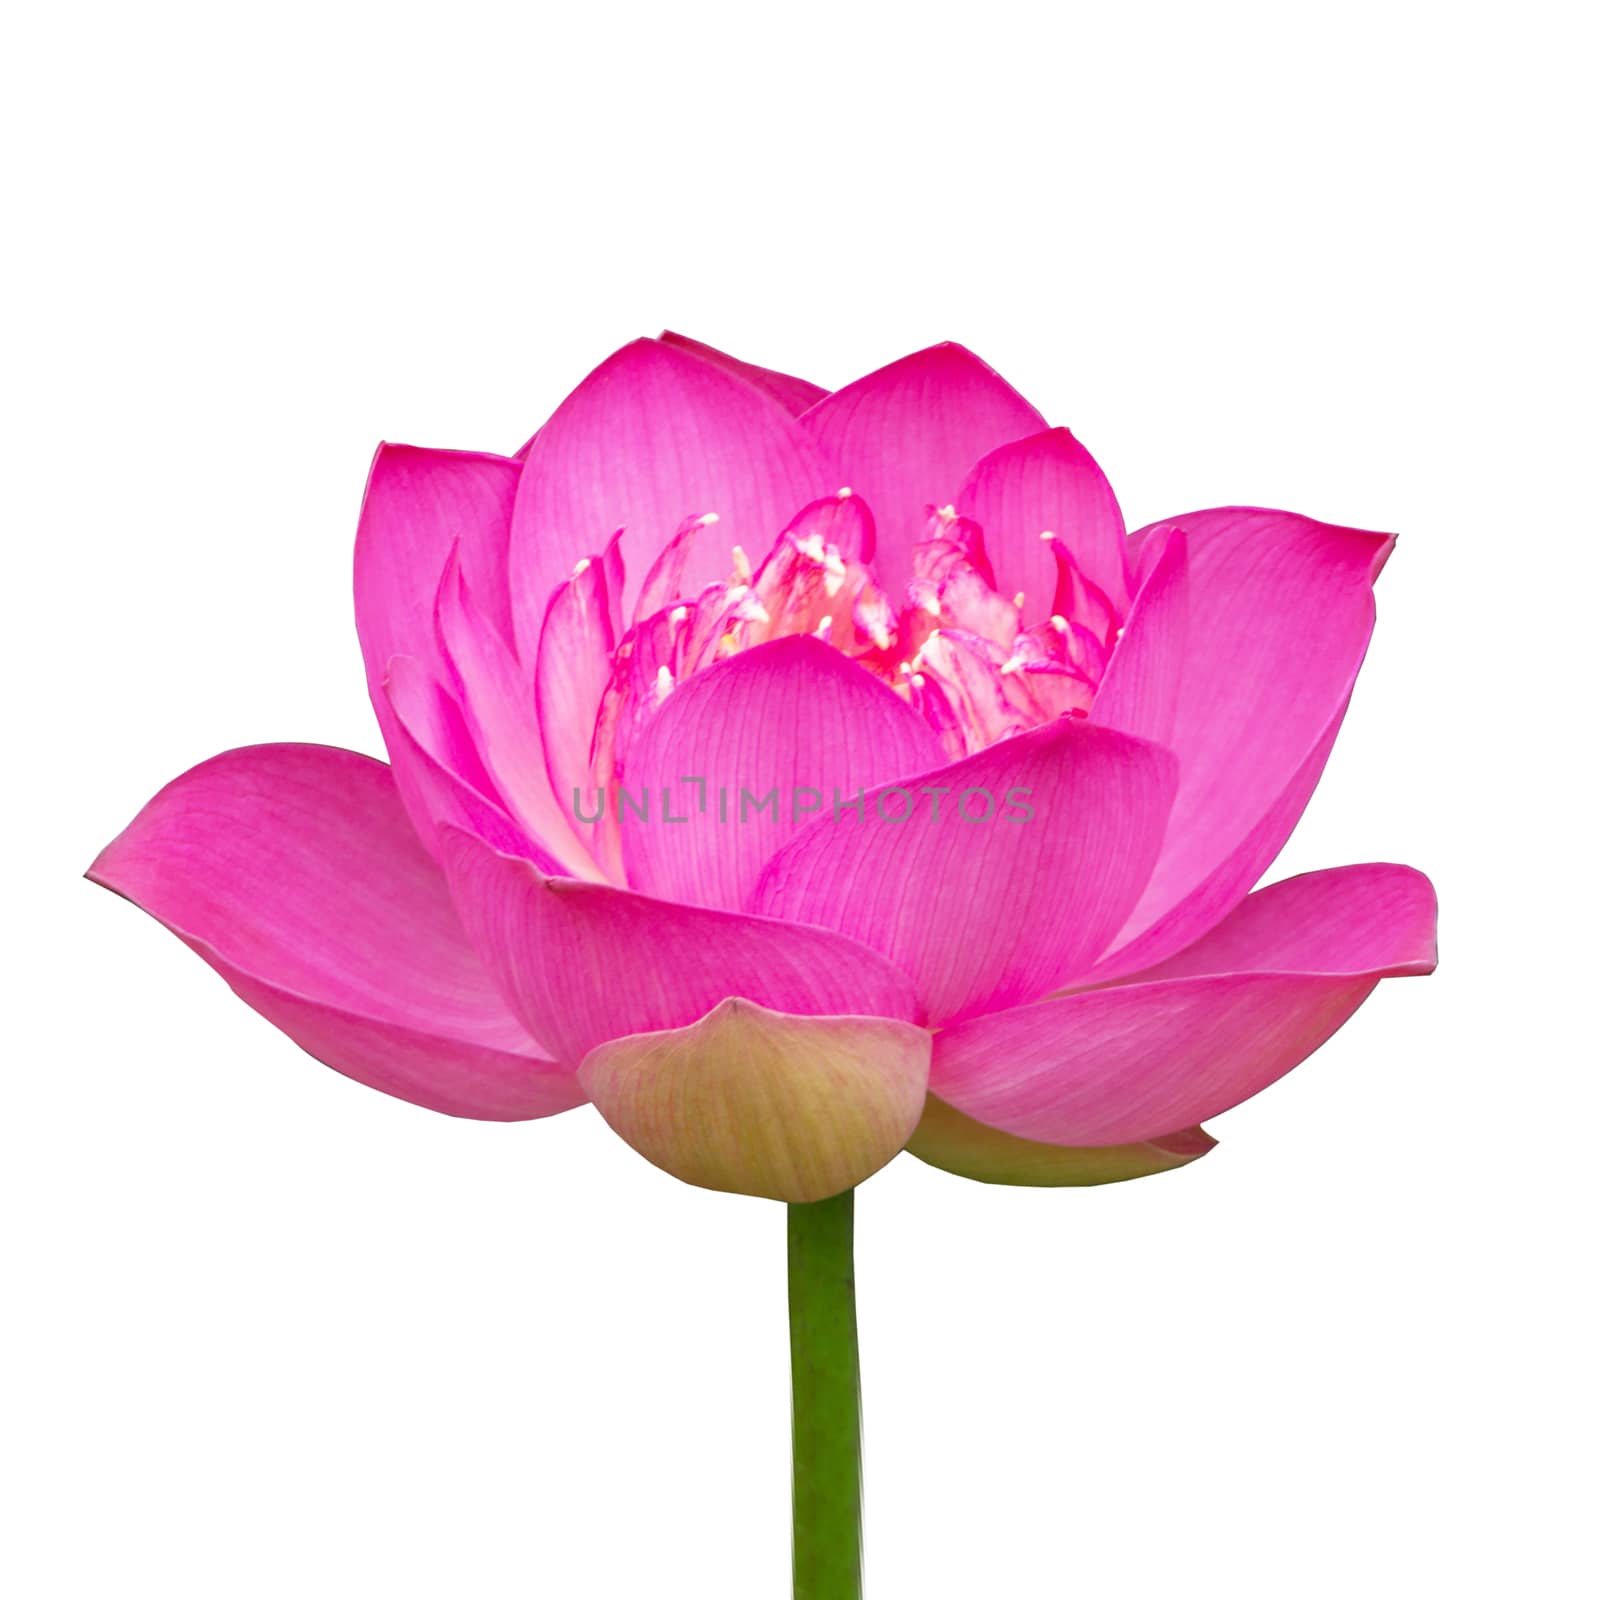 lotus on isolate white background. by Noppharat_th